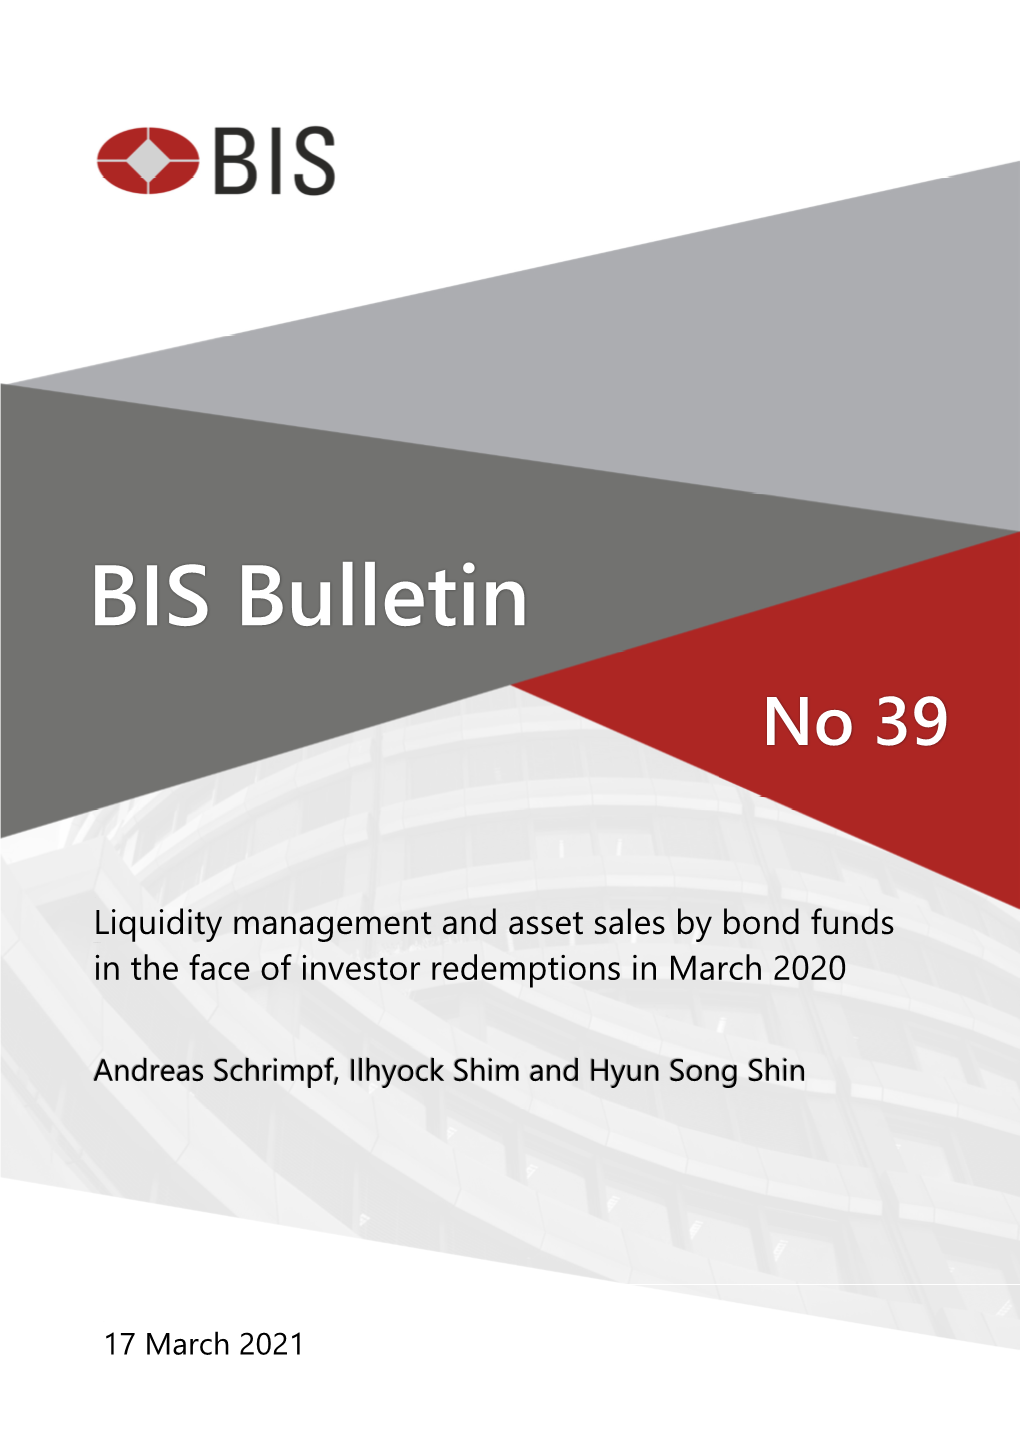 Liquidity Management and Asset Sales by Bond Funds in the Face of Investor Redemptions in March 2020